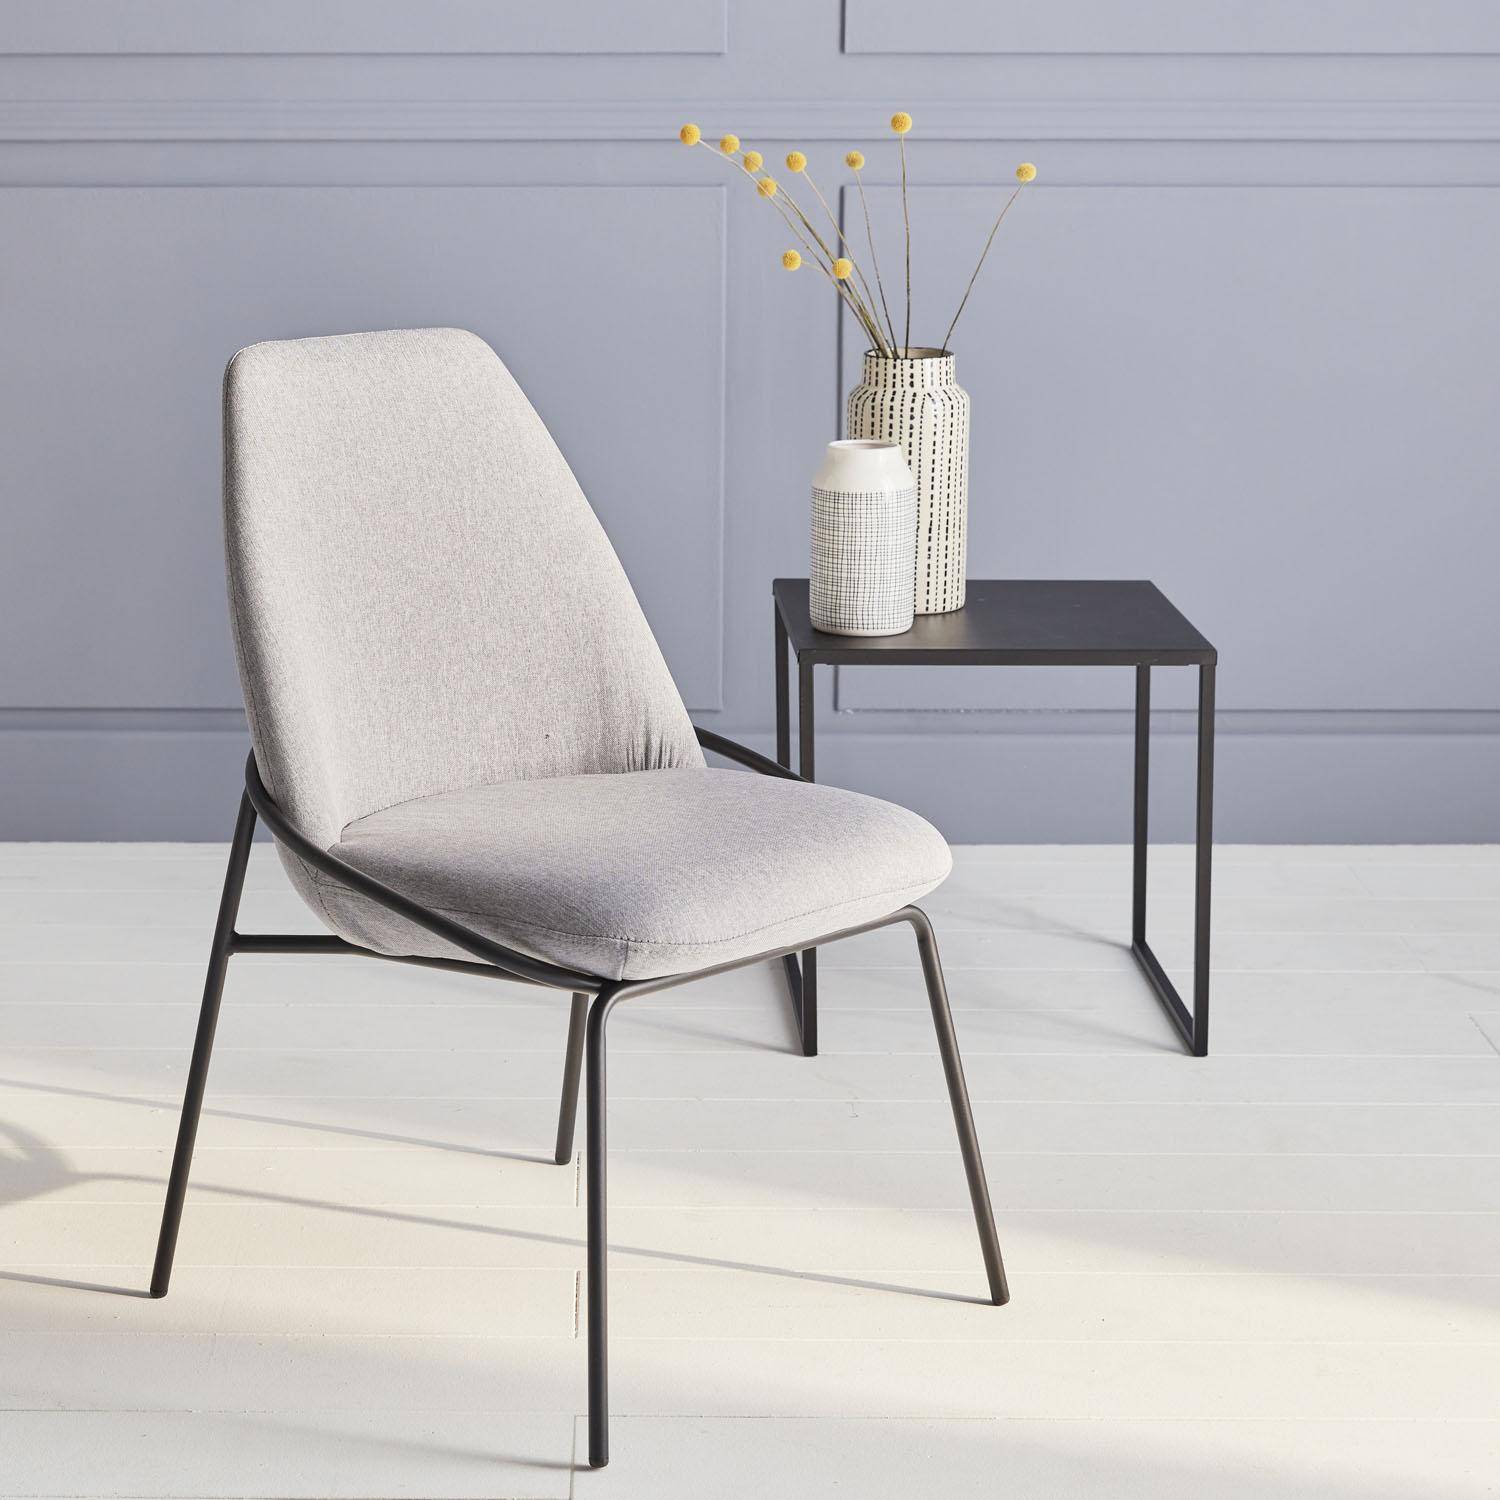 Retro-style metal and upholstered chair, 56.5x63x82.5cm, Lisbet, Light Grey,sweeek,Photo1